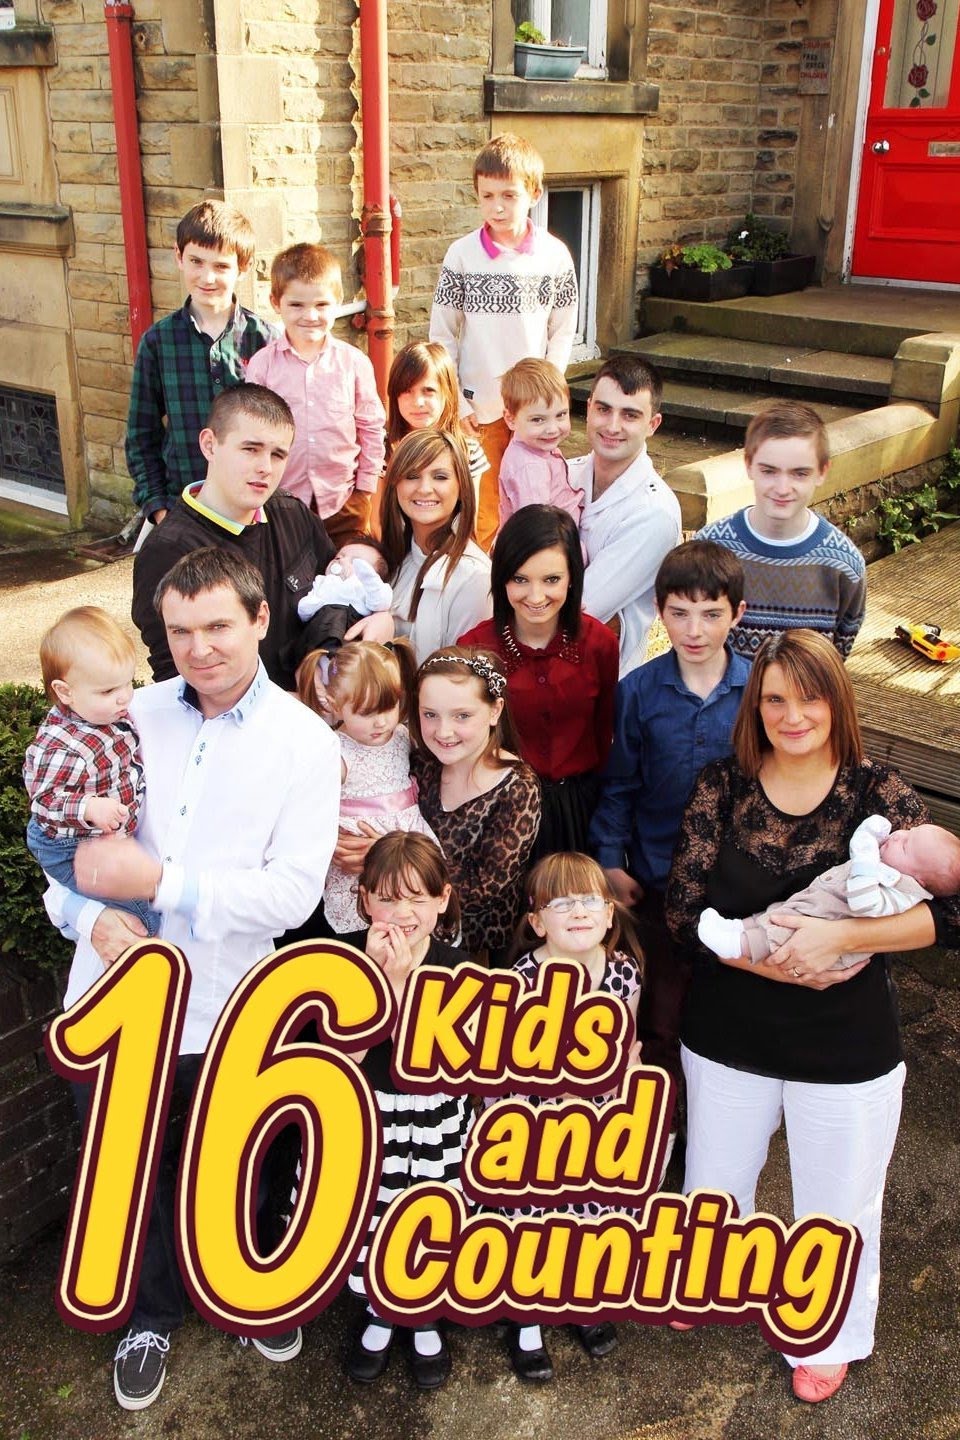 16 Kids and Counting